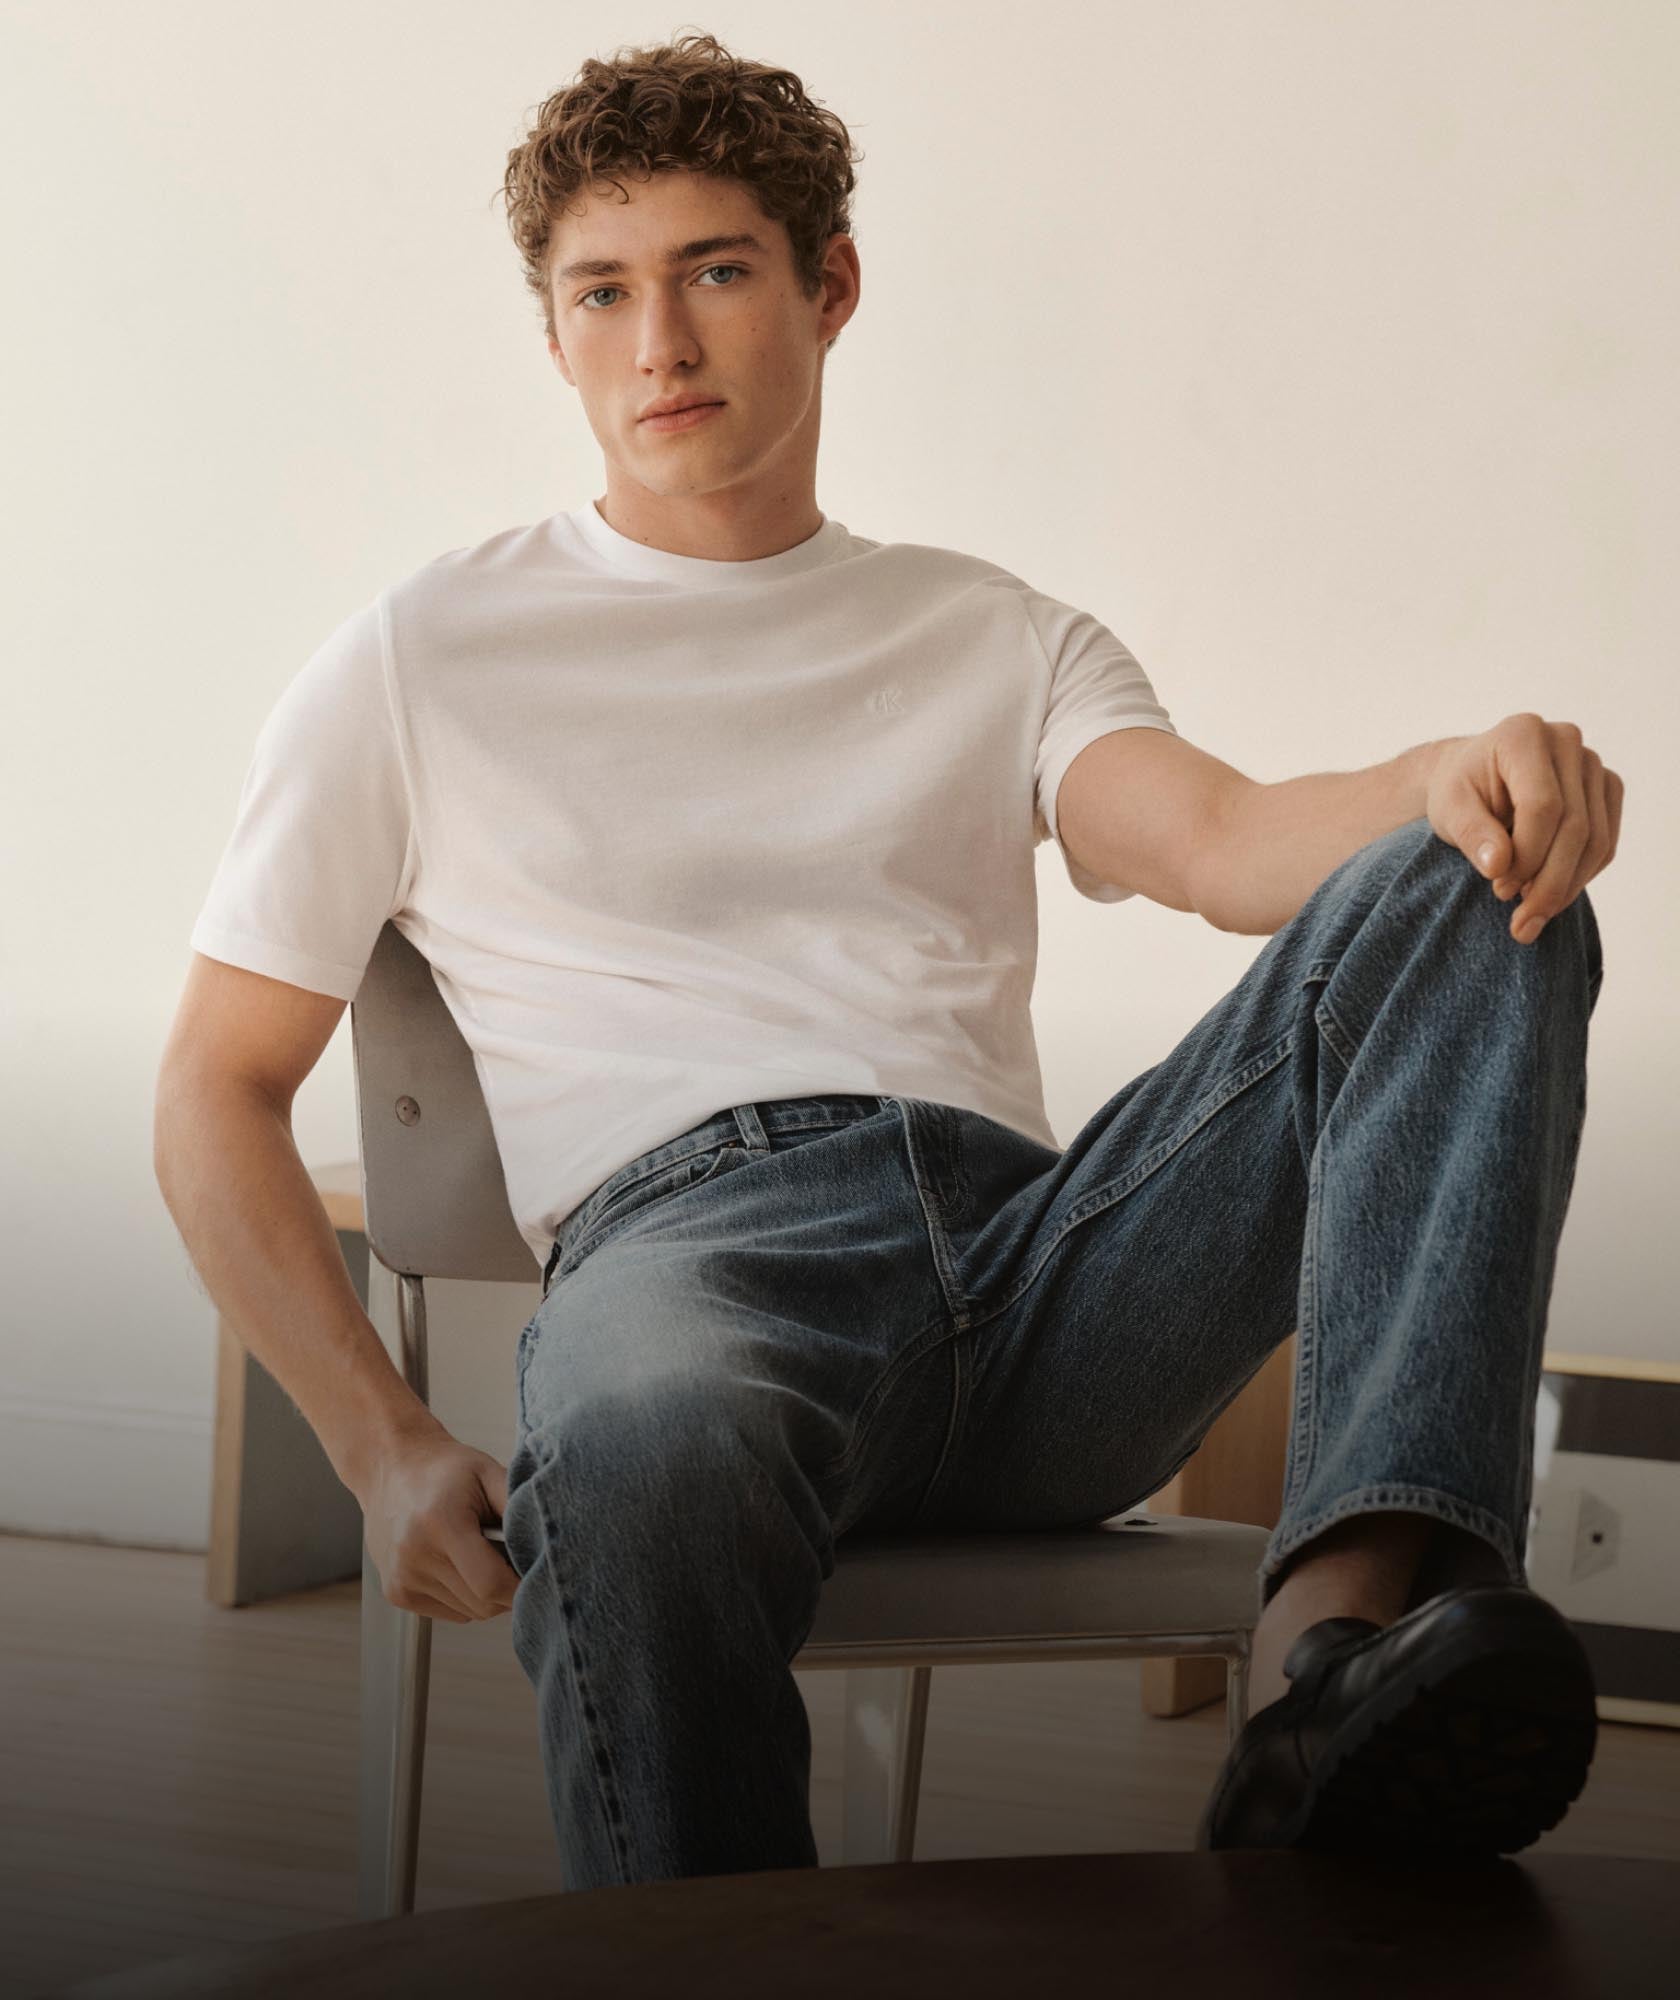 Man sitting in a chair with his leg up wearing medium wash denim jeans